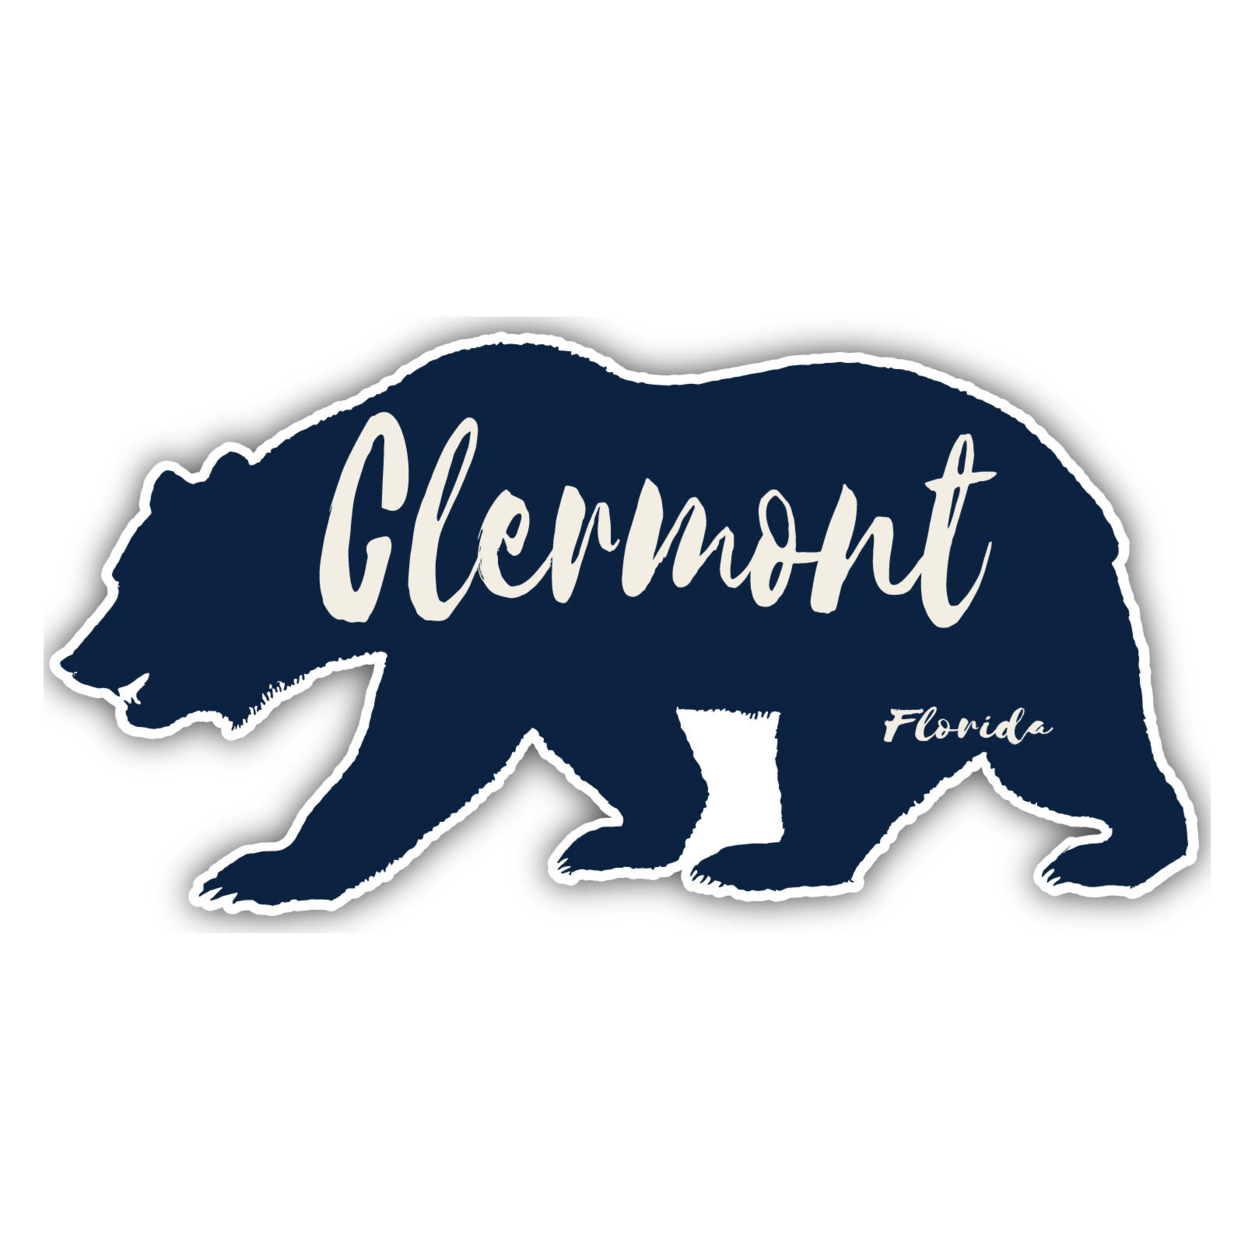 Clermont Florida Souvenir Decorative Stickers (Choose Theme And Size) - 4-Pack, 4-Inch, Bear